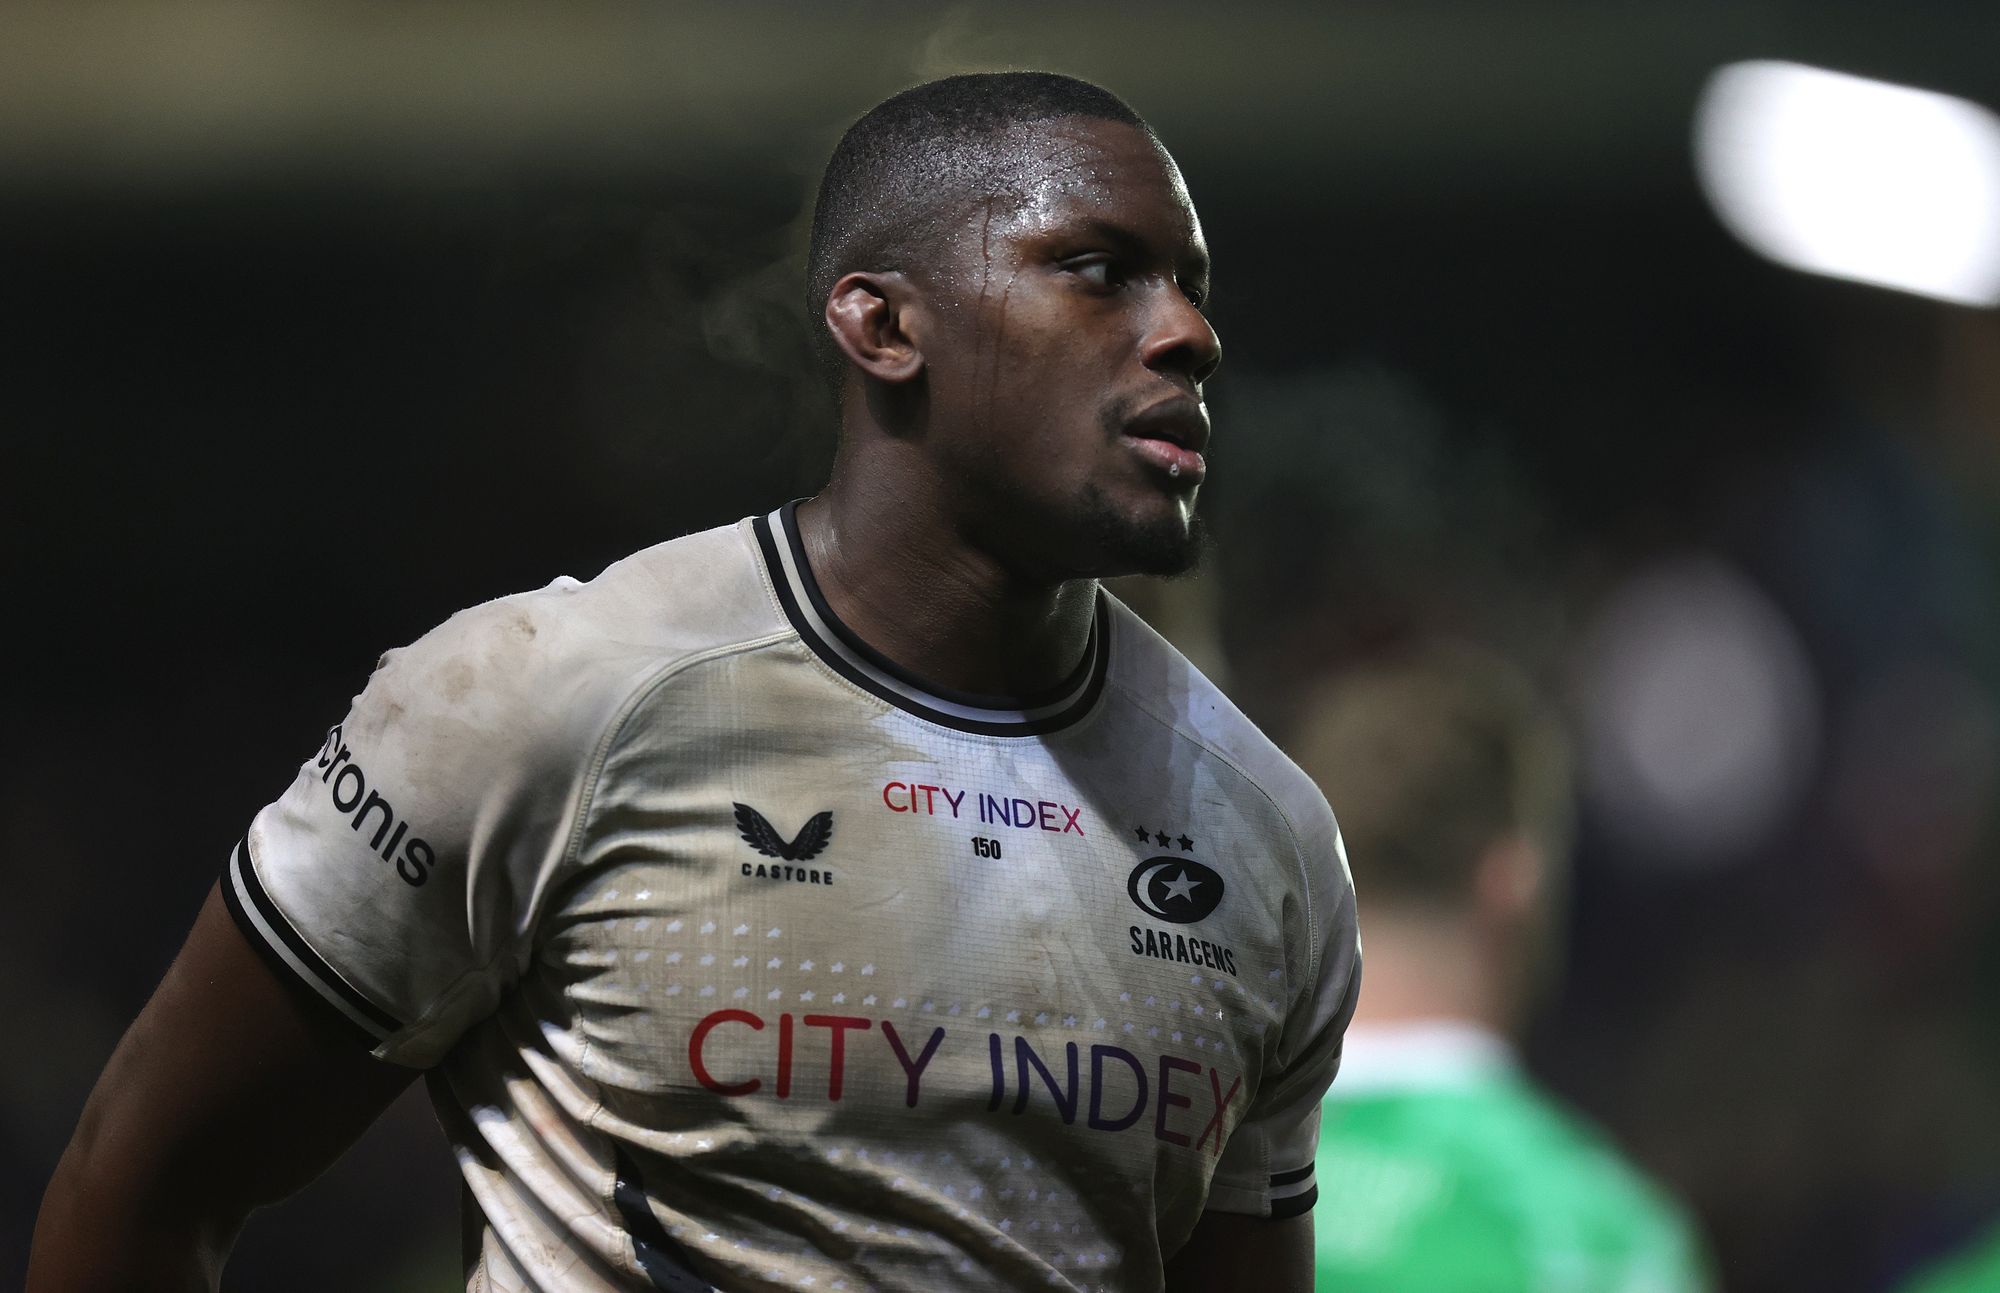 maro itoje cleared to play for saracens after successful disciplinary hearing